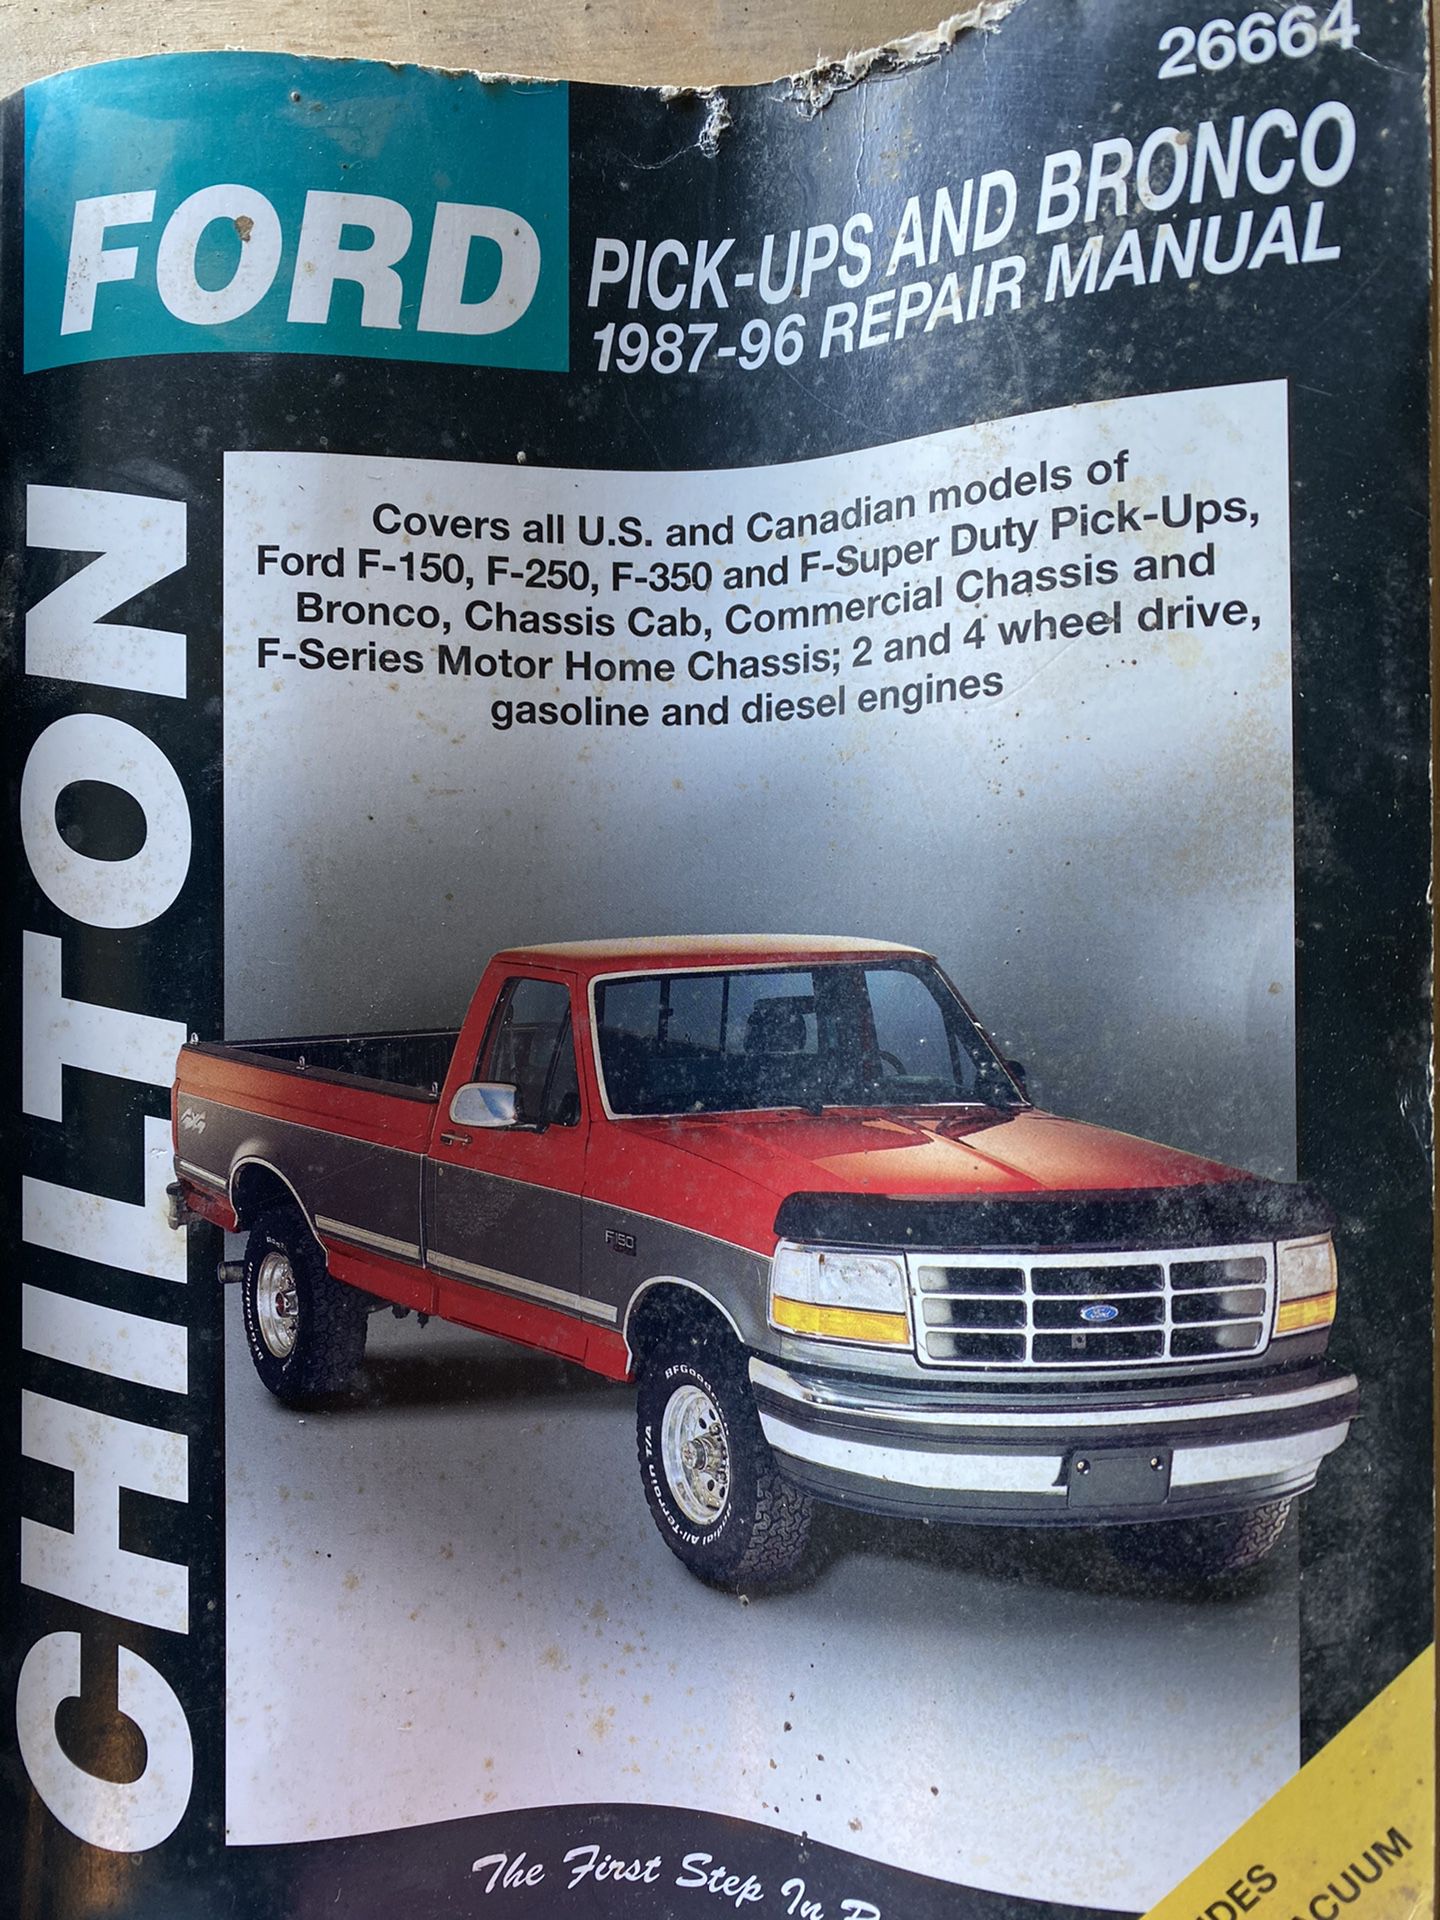 Older Ford truck Chiltons and parts.